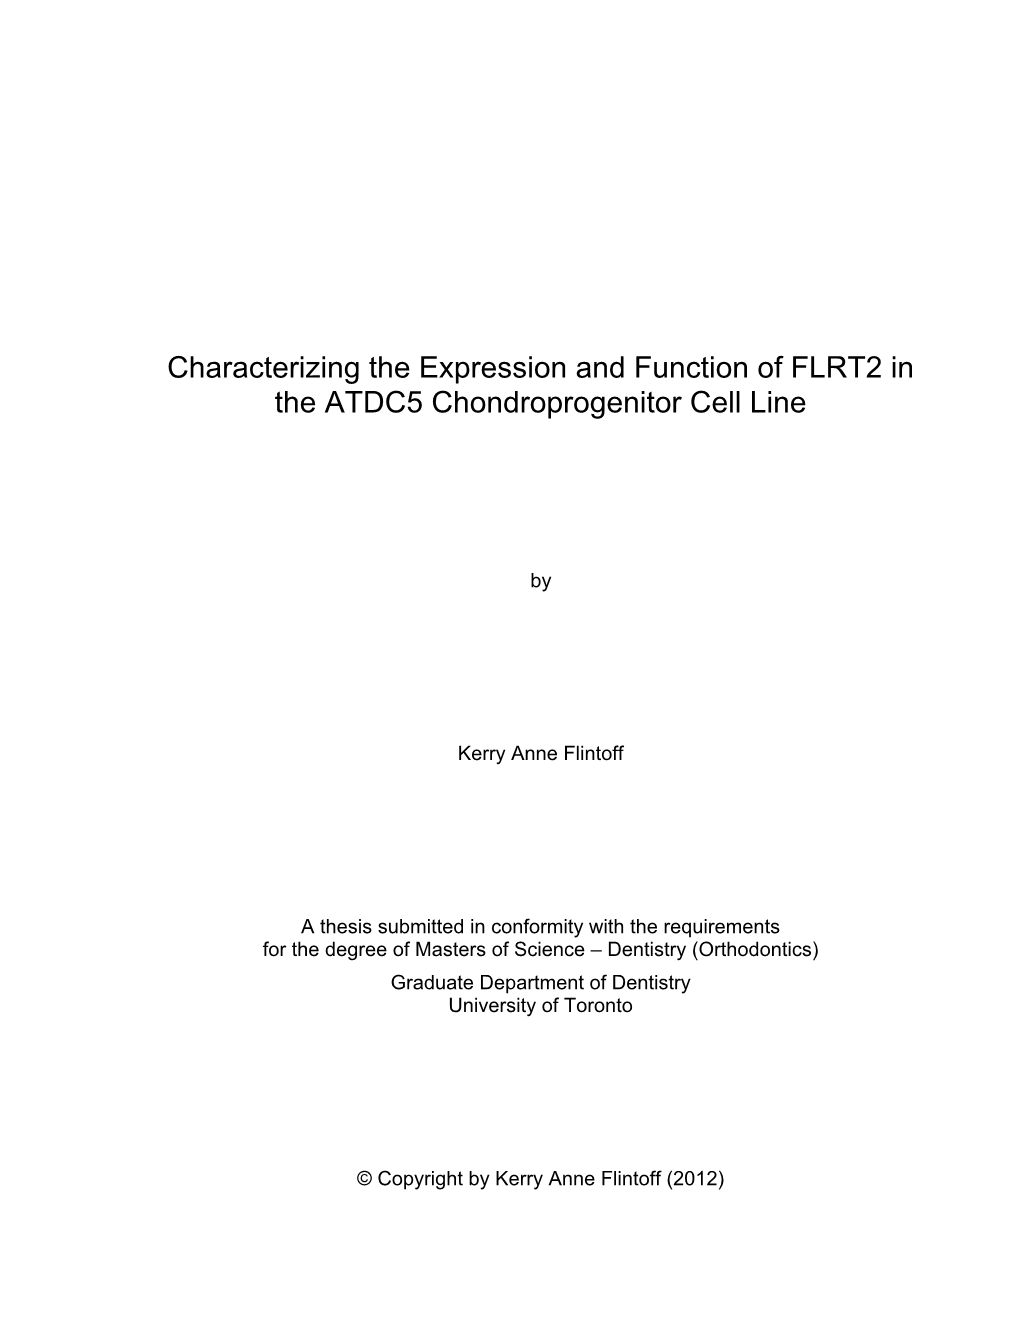 Characterizing the Expression and Function of FLRT2 in the ATDC5 Chondroprogenitor Cell Line